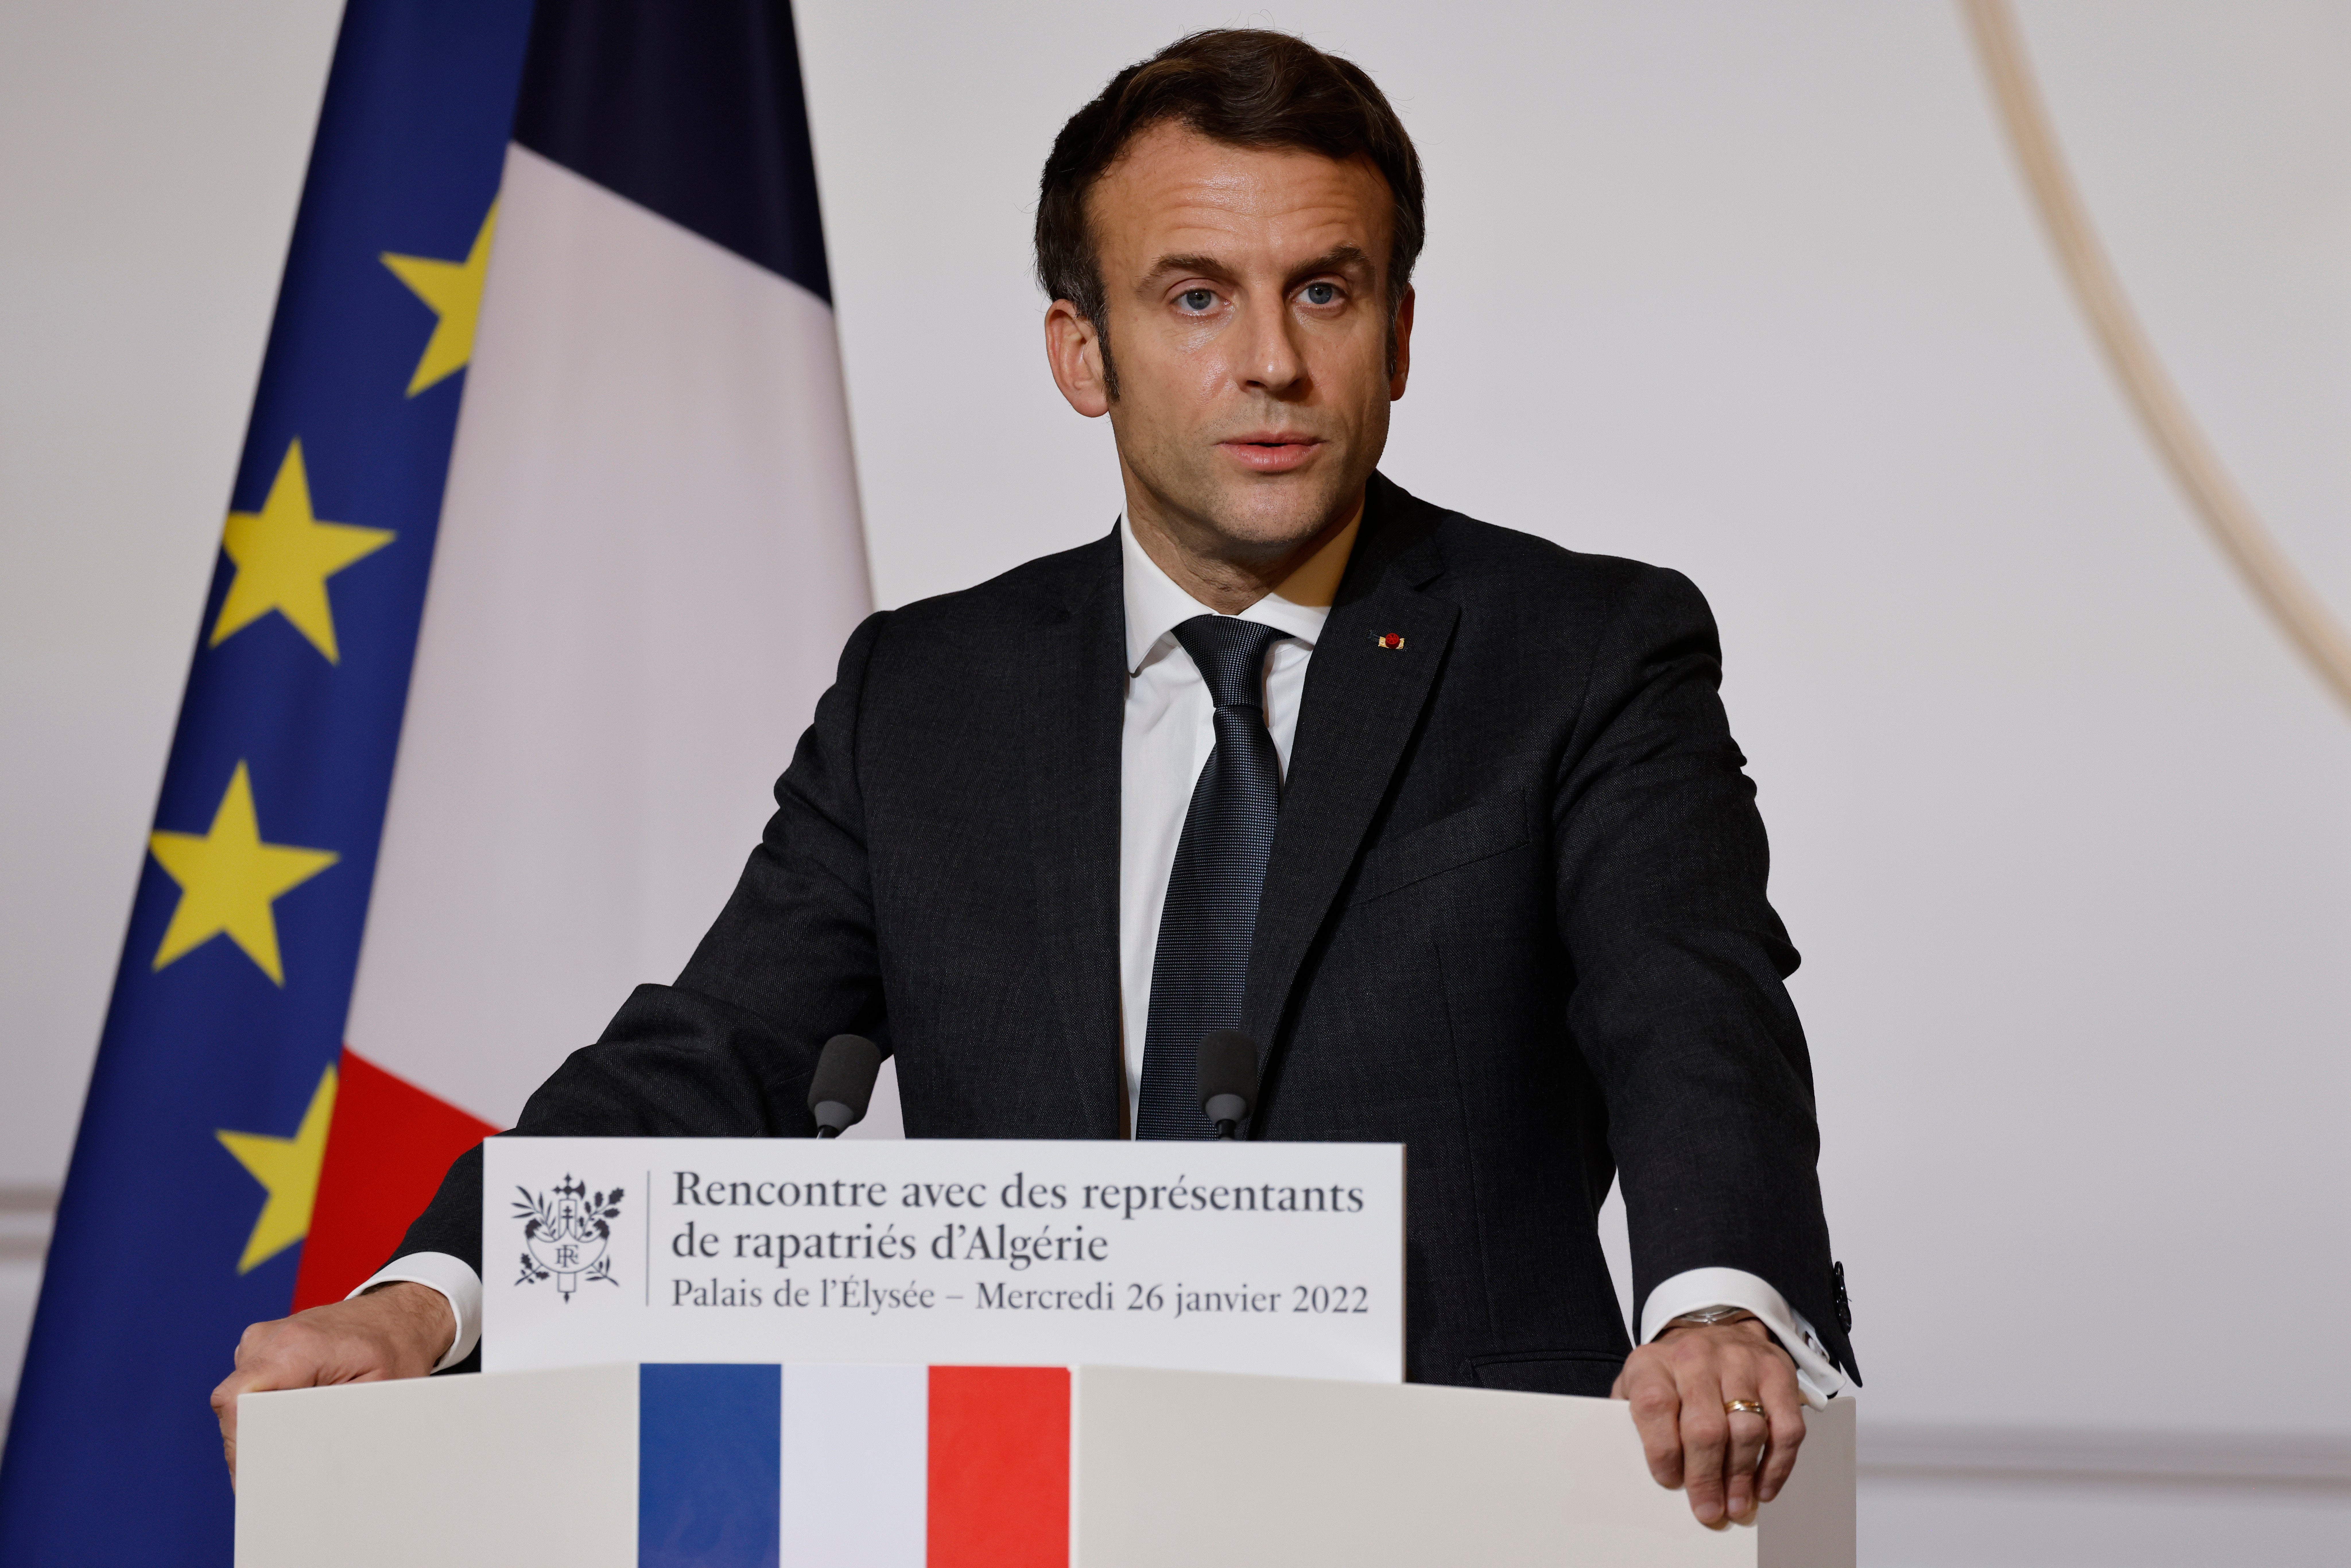 Emmanuel Macron urged the UK to open legal routes to cross the Channel